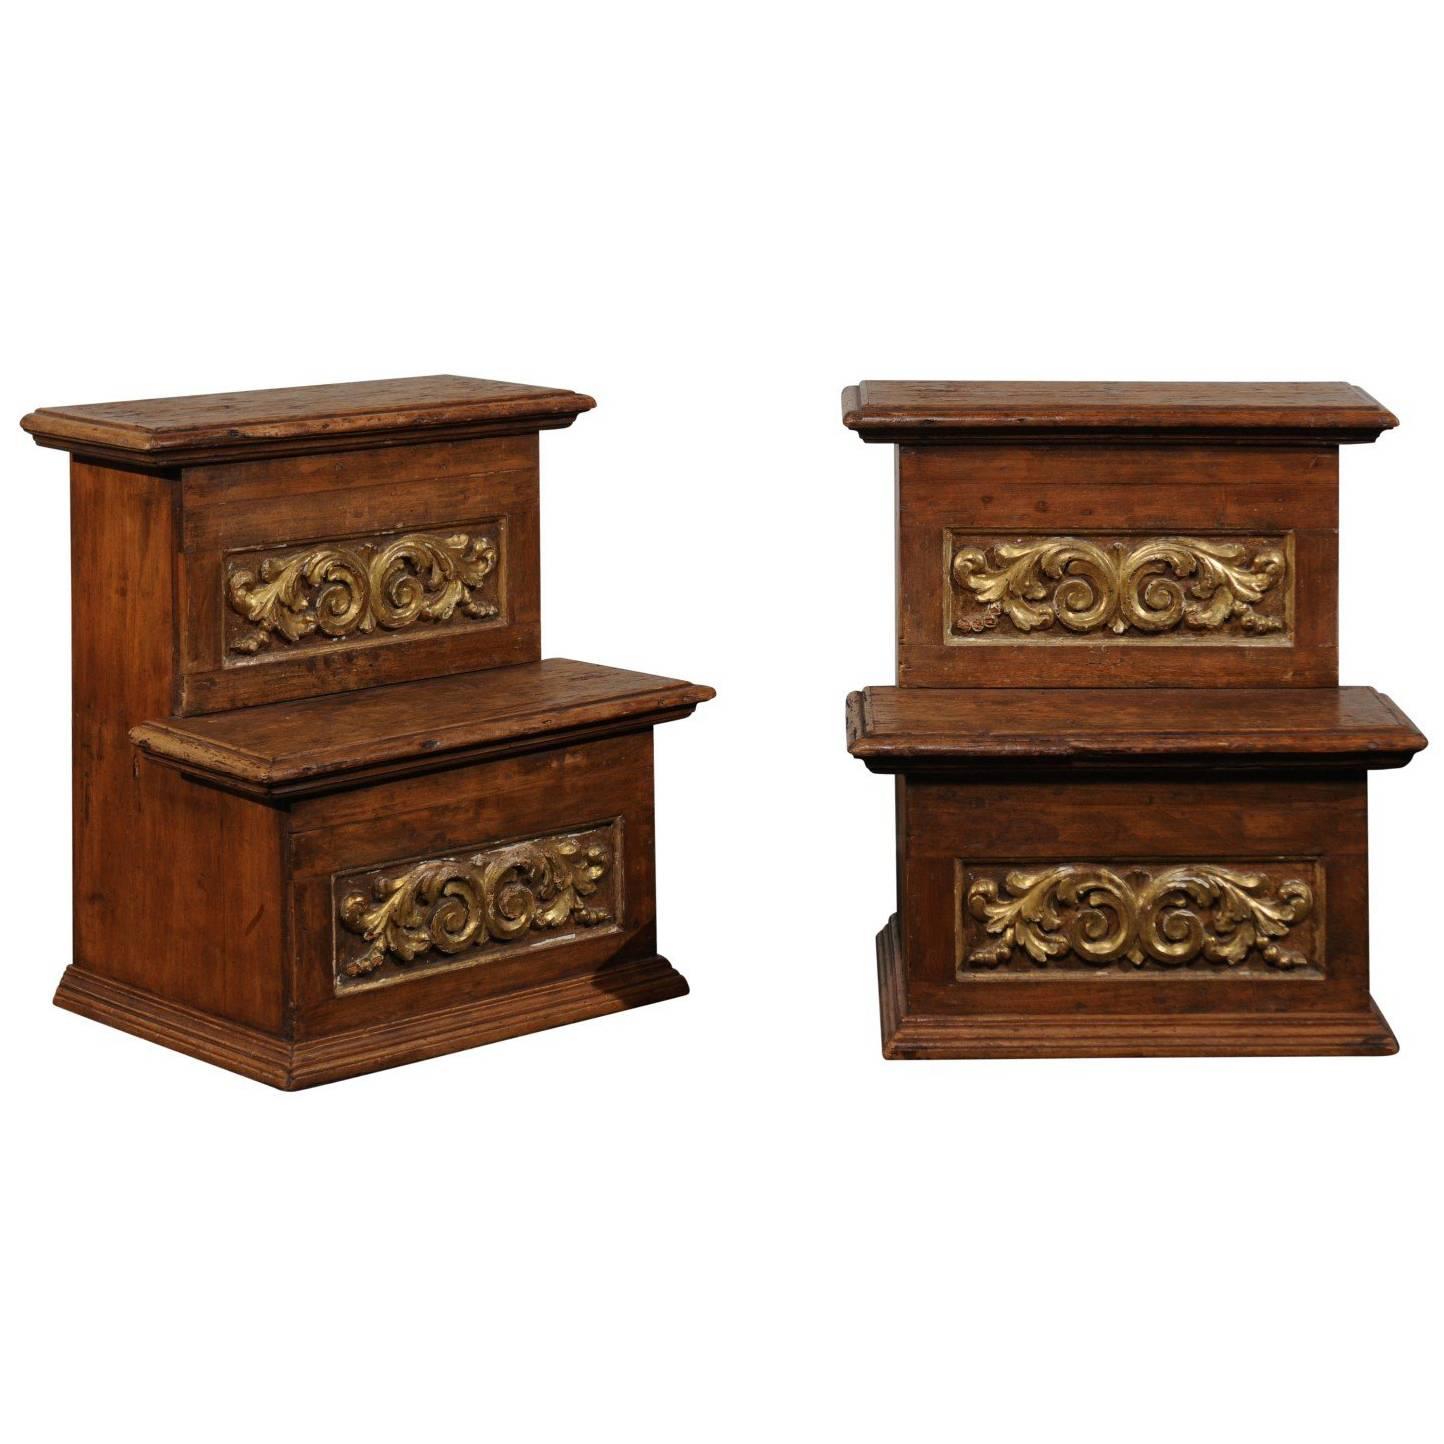 Pair of 18th-19th Century Italian Step Tables with Gilt and Old Elements